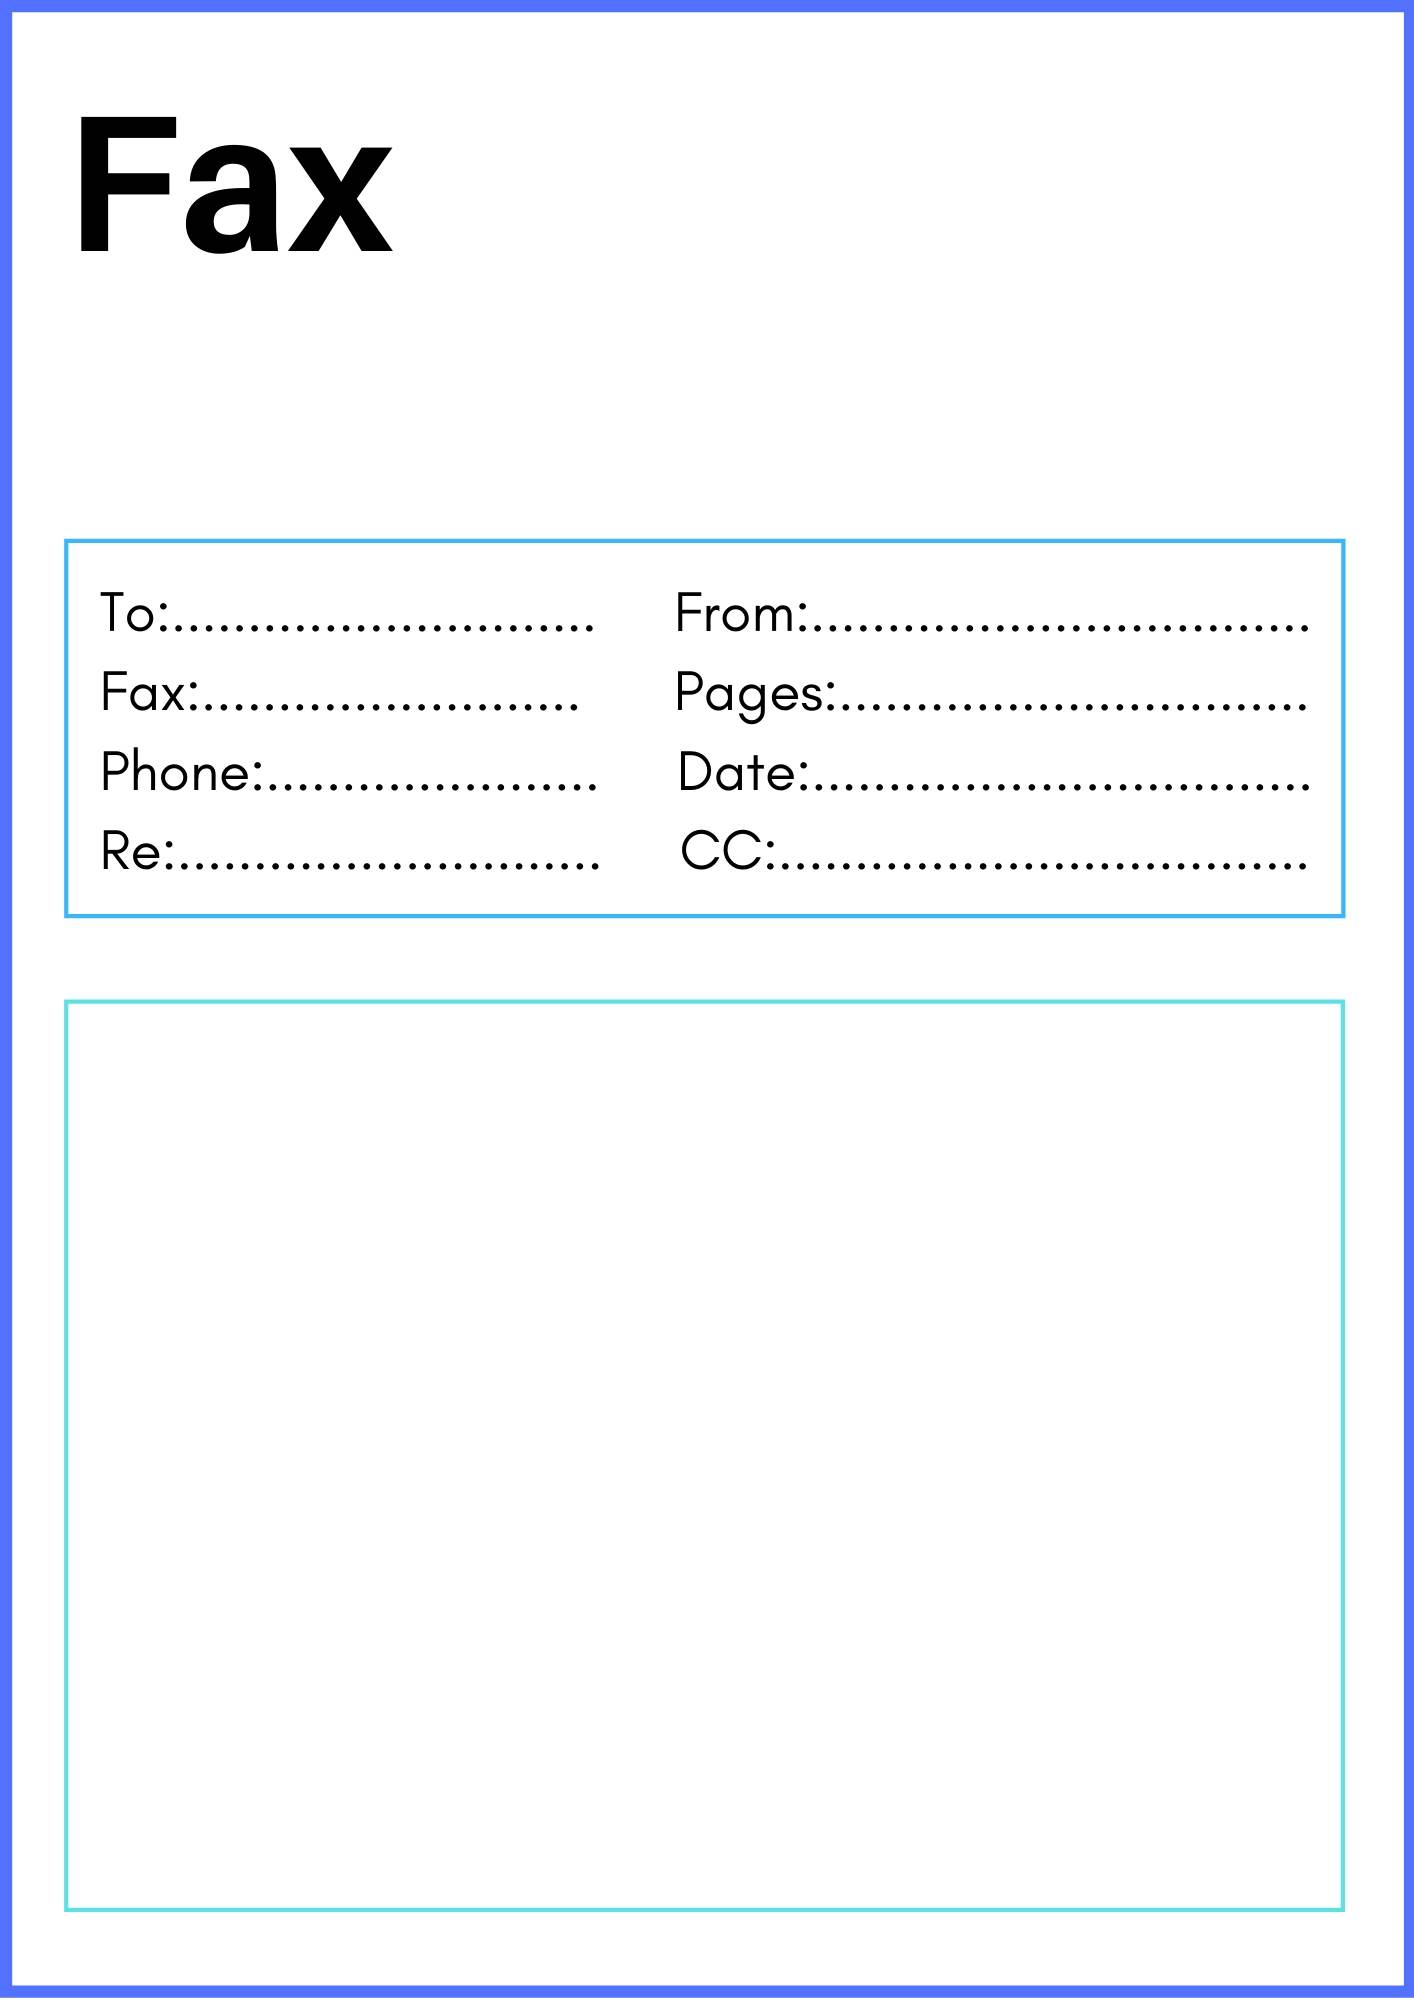 Fax Cover Sheet Template PDF